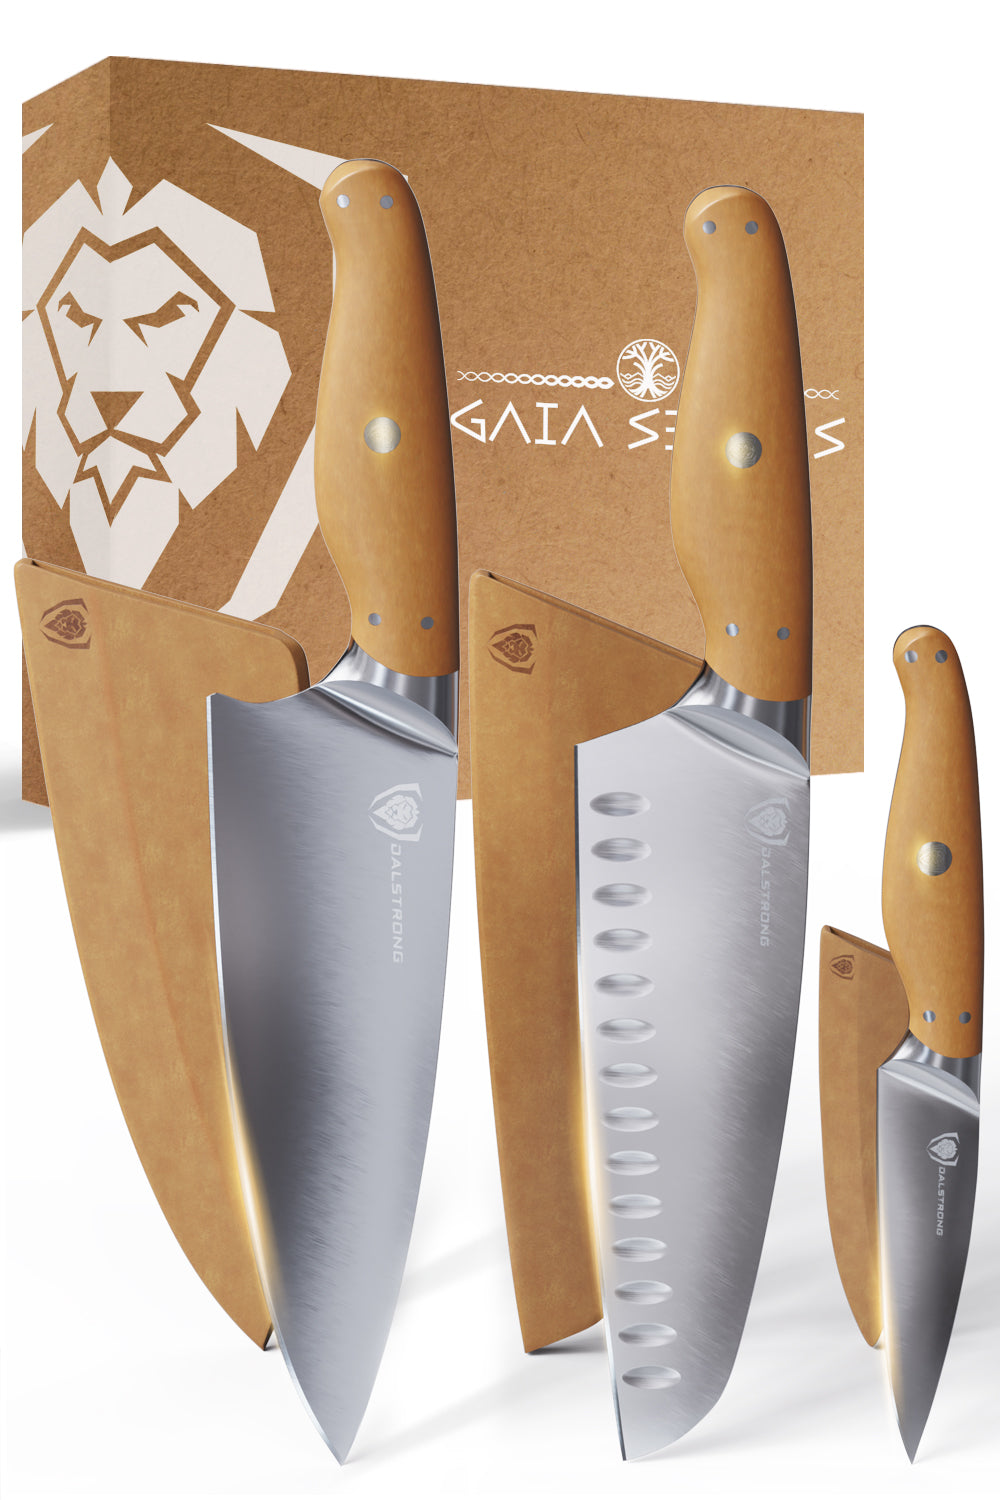 3-Piece Knife Set | Chef - Santoku - Paring | Sustainable and Earth-friendly Material | Gaia Series | Dalstrong ©